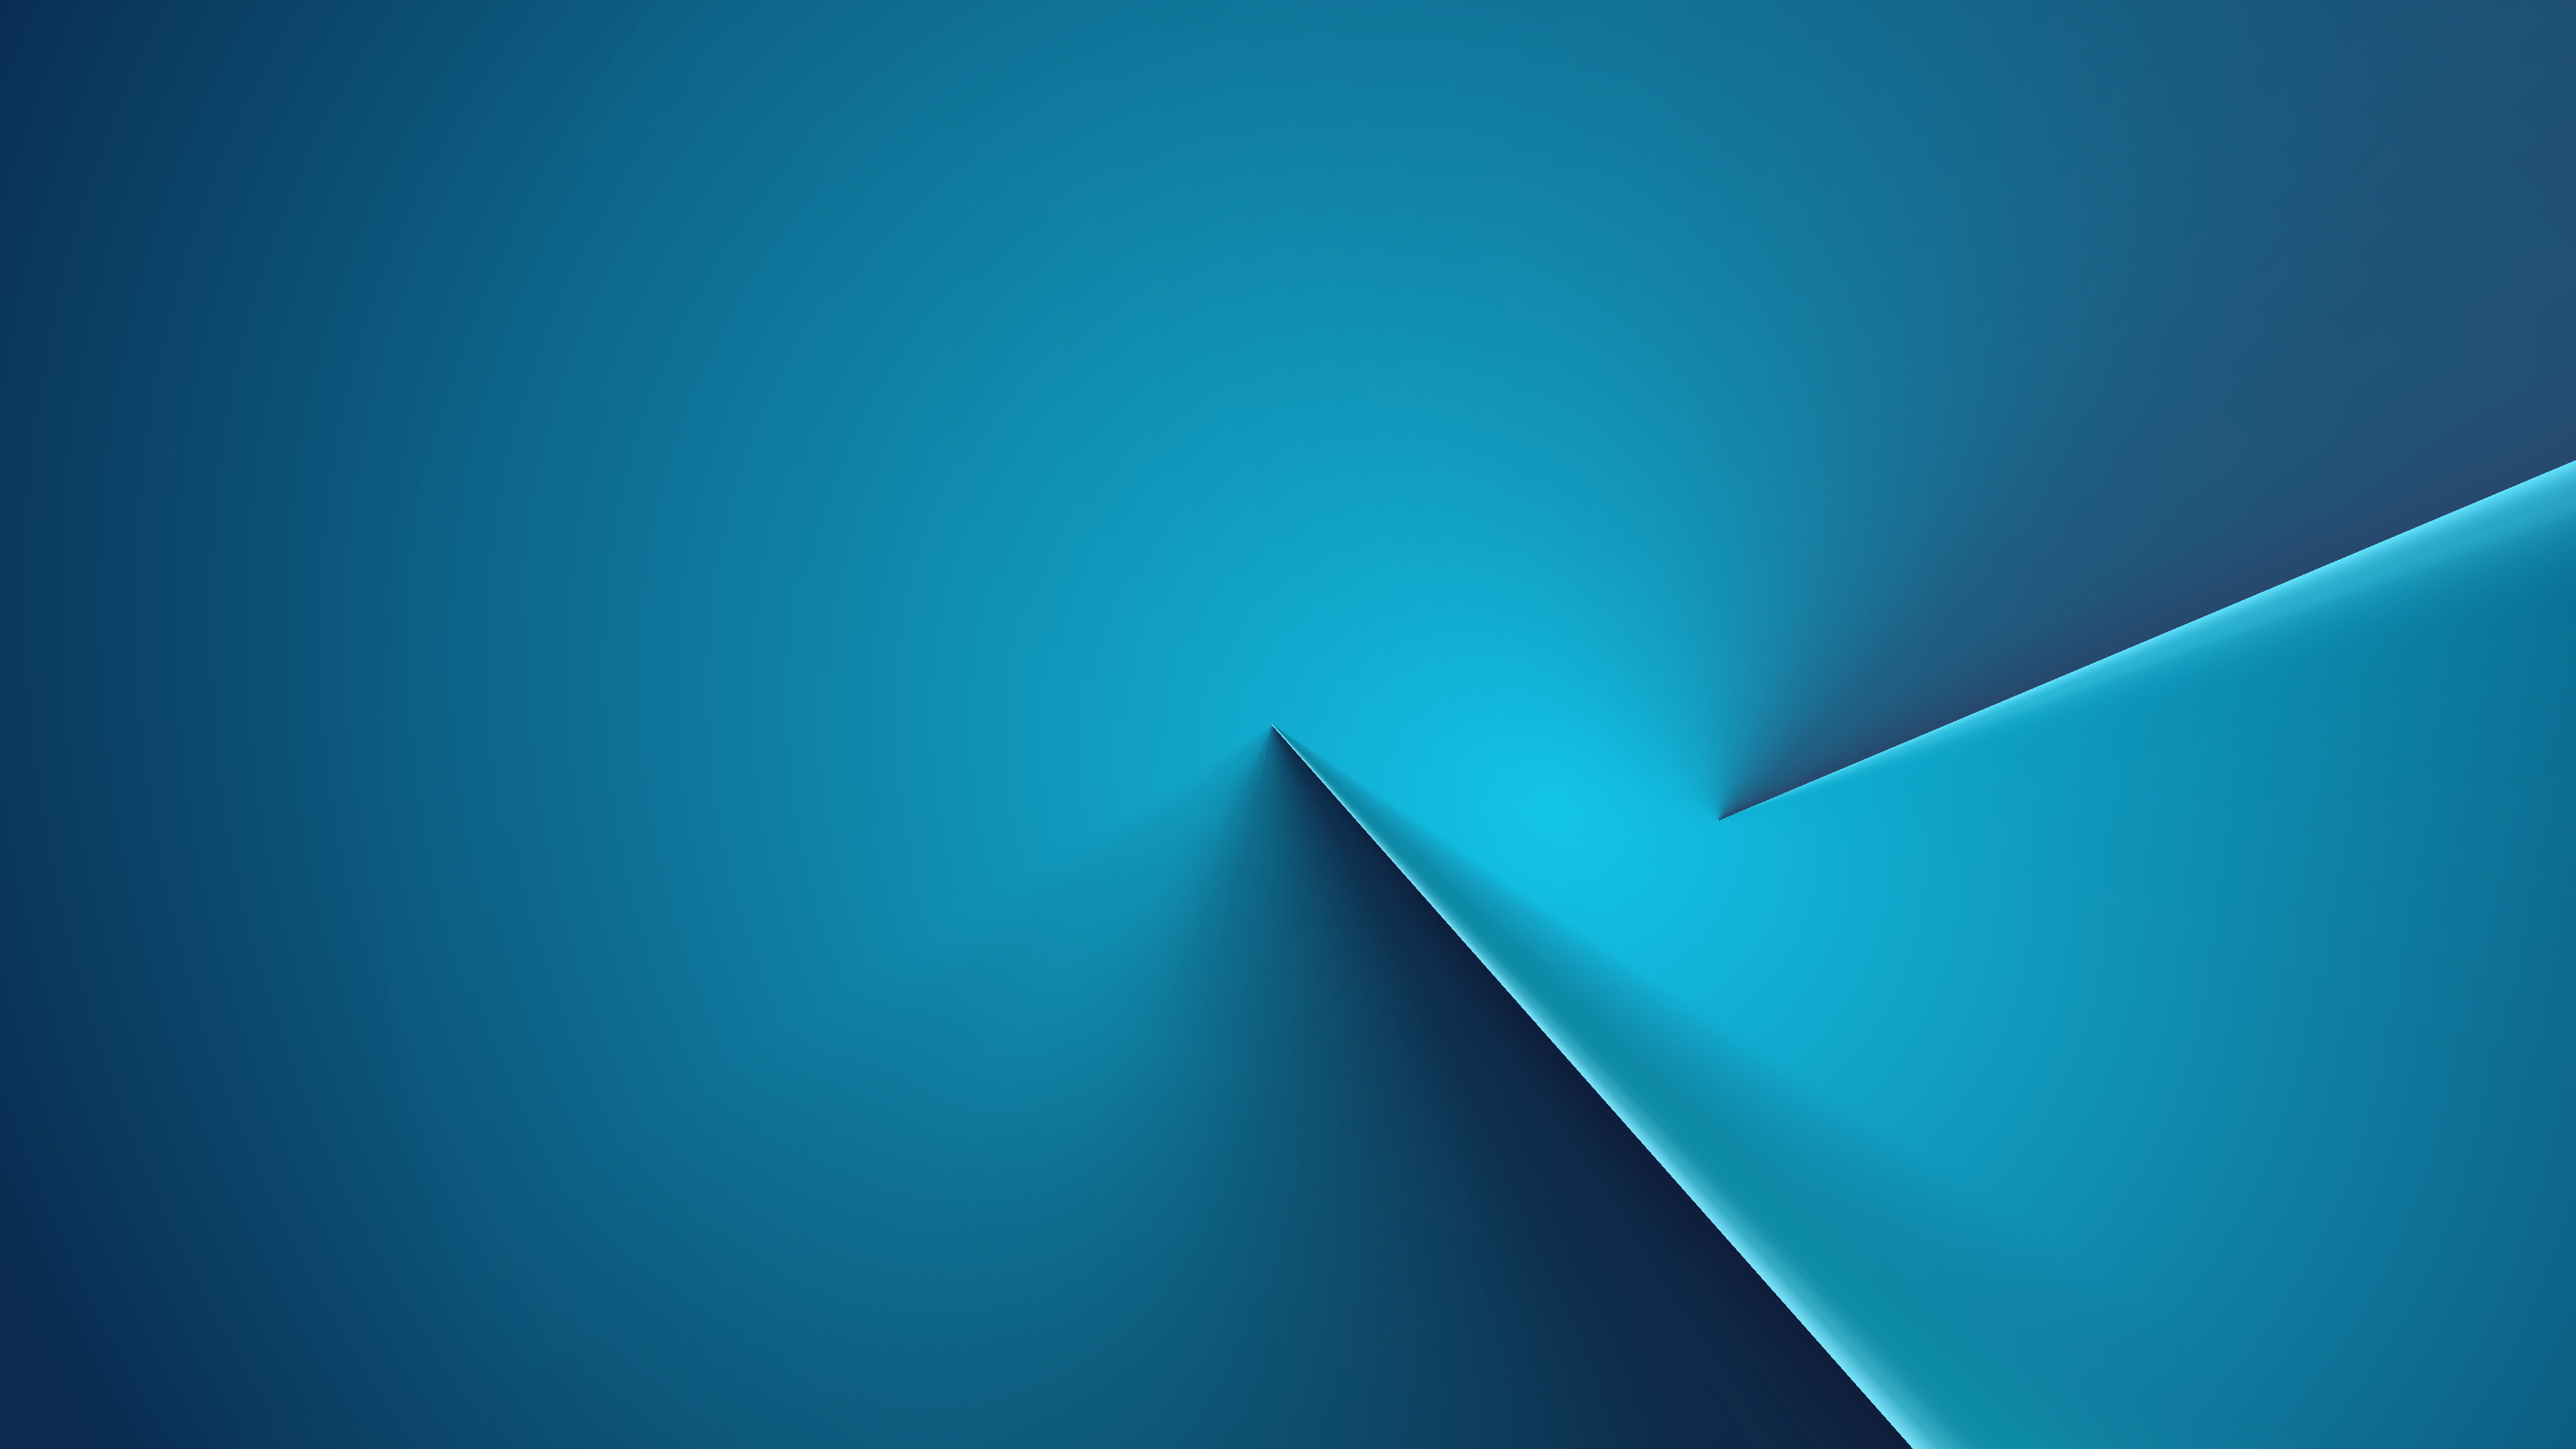 Abstract Blue Line 4k Wallpaper,HD Abstract Wallpapers,4k Wallpapers,Images,Backgrounds,Photos